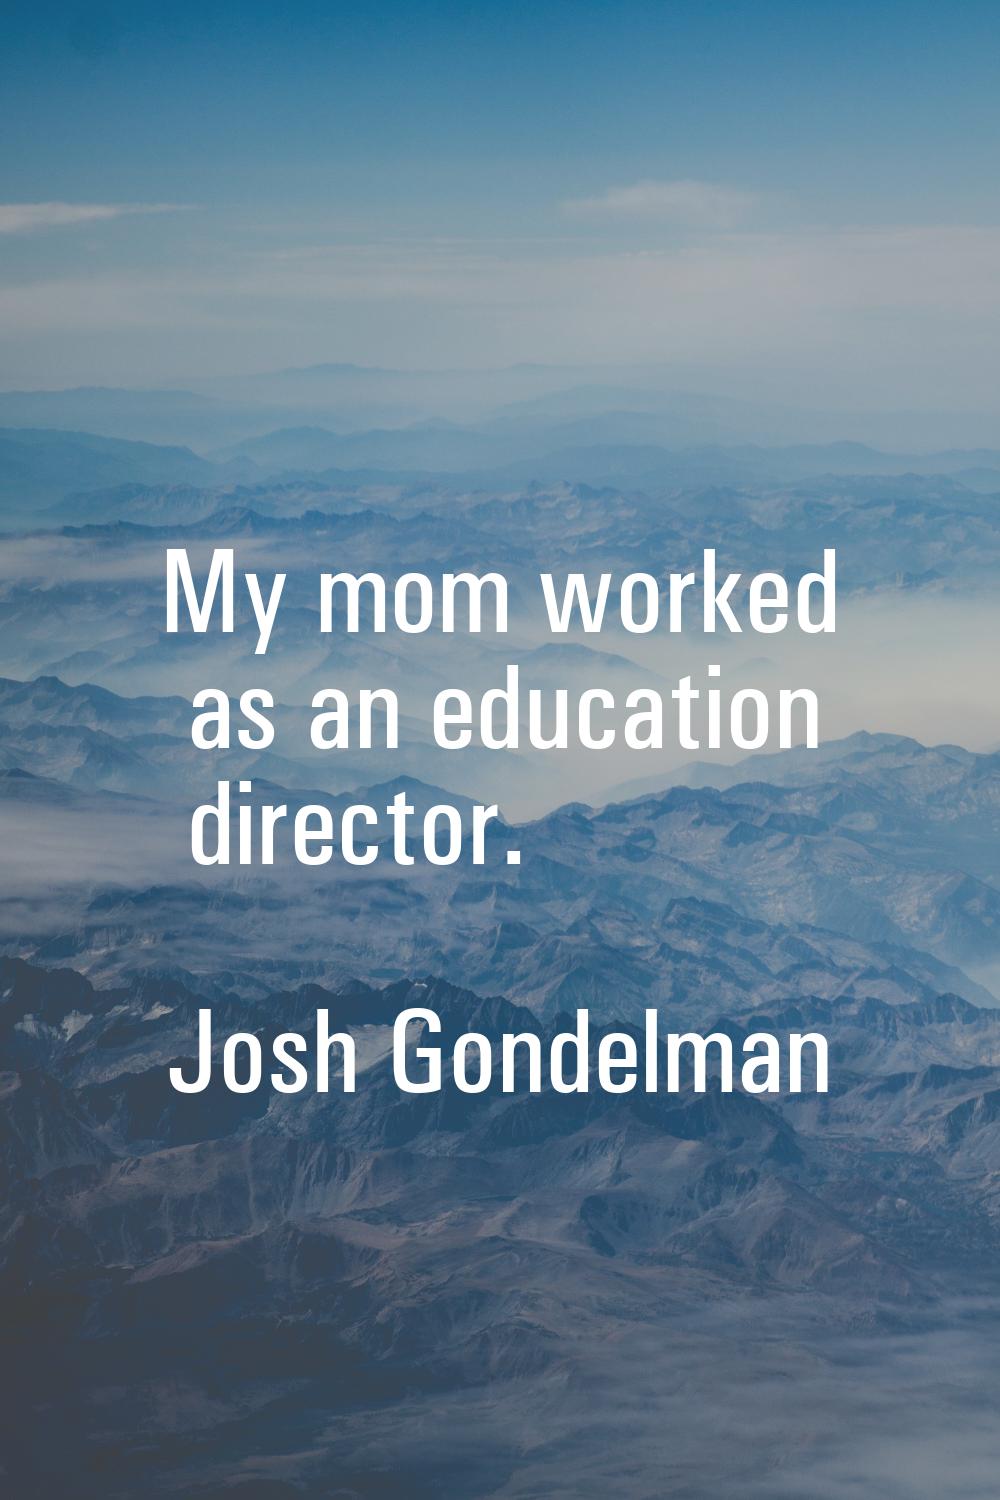 My mom worked as an education director.